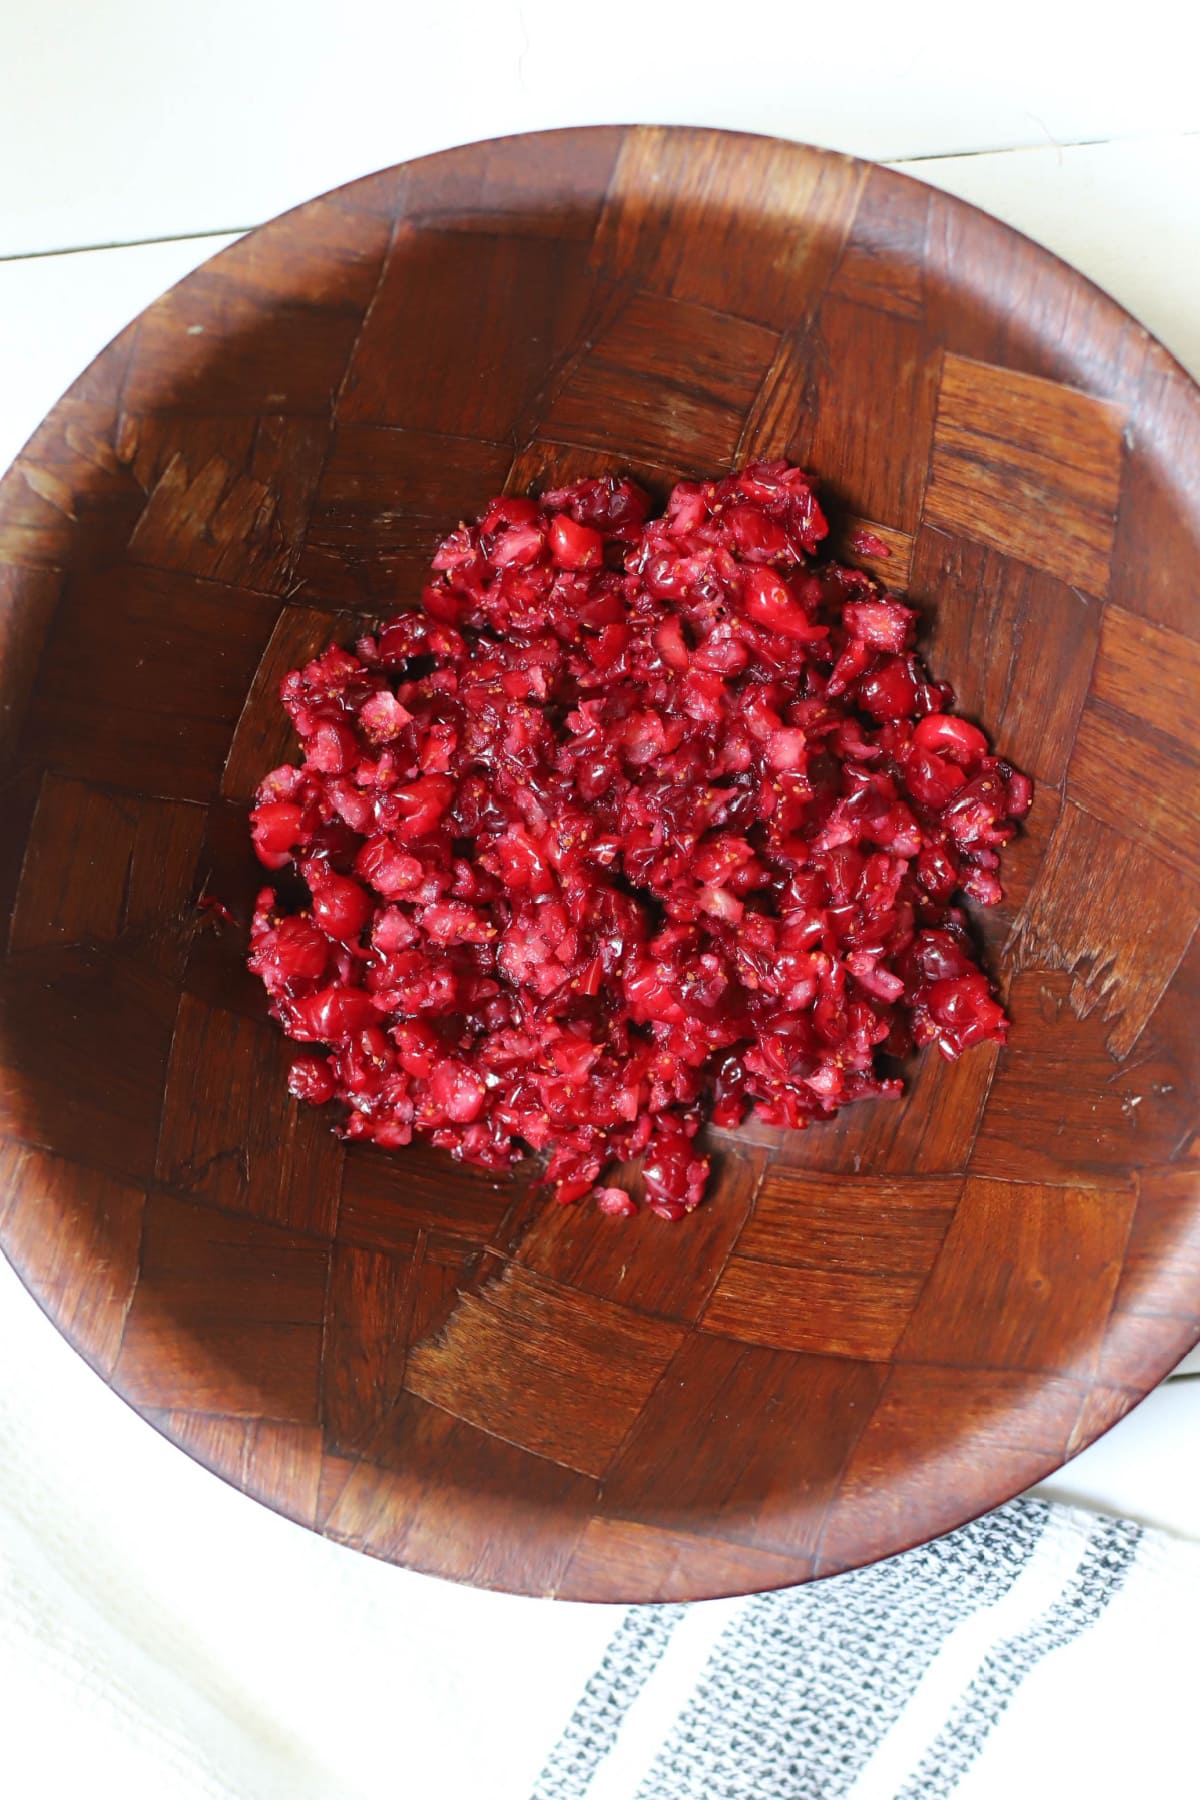 Chopped cranberries in bowl